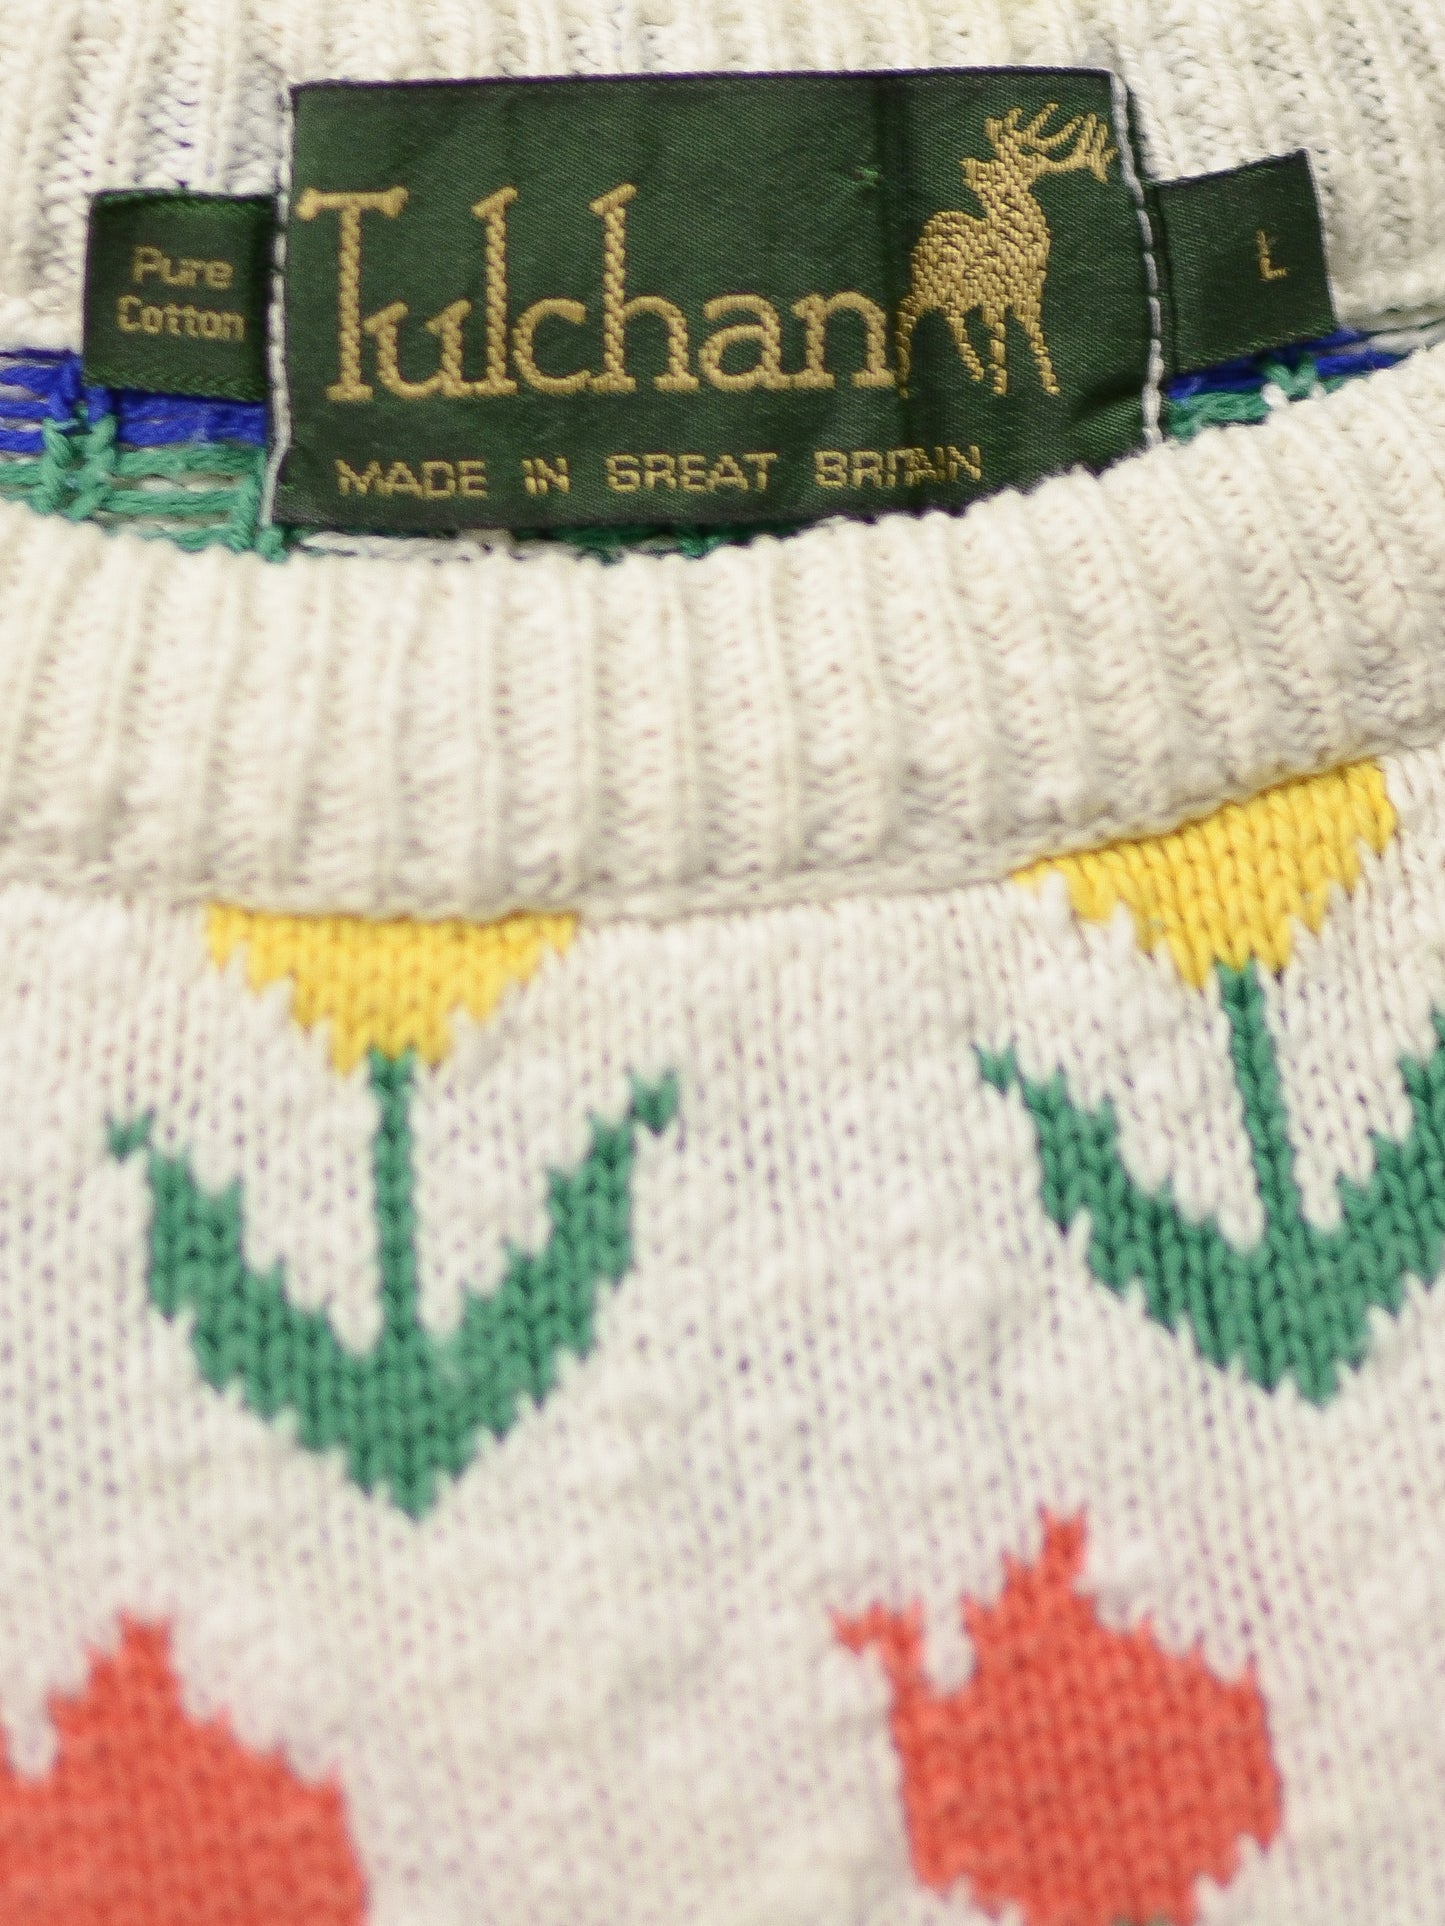 1990s Tulchan white, red, blue and yellow tulip pattern cotton jumper